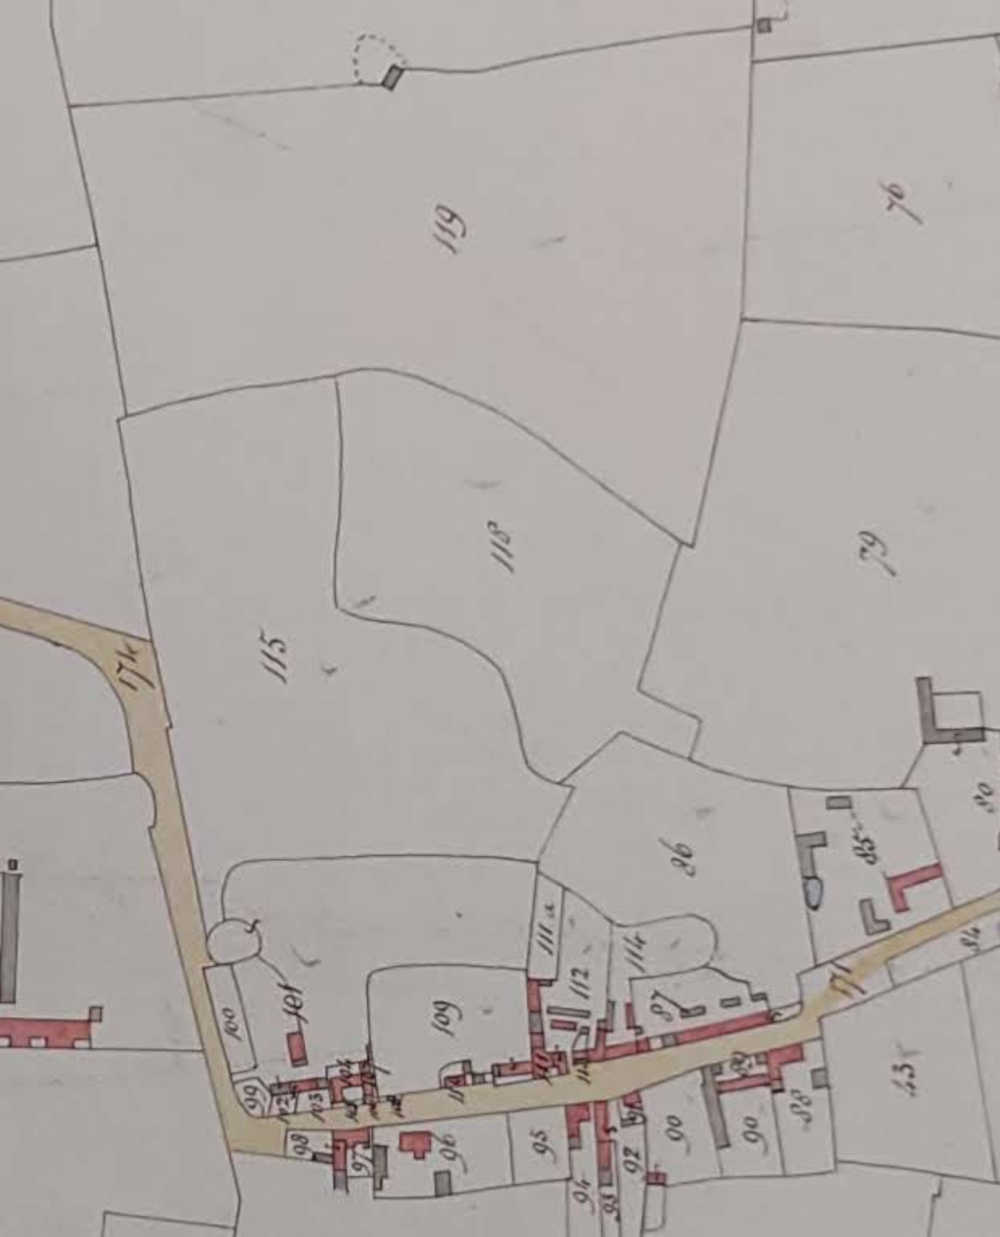 1840 Tithe map of Great Linford showing Windmill Hill Farm.